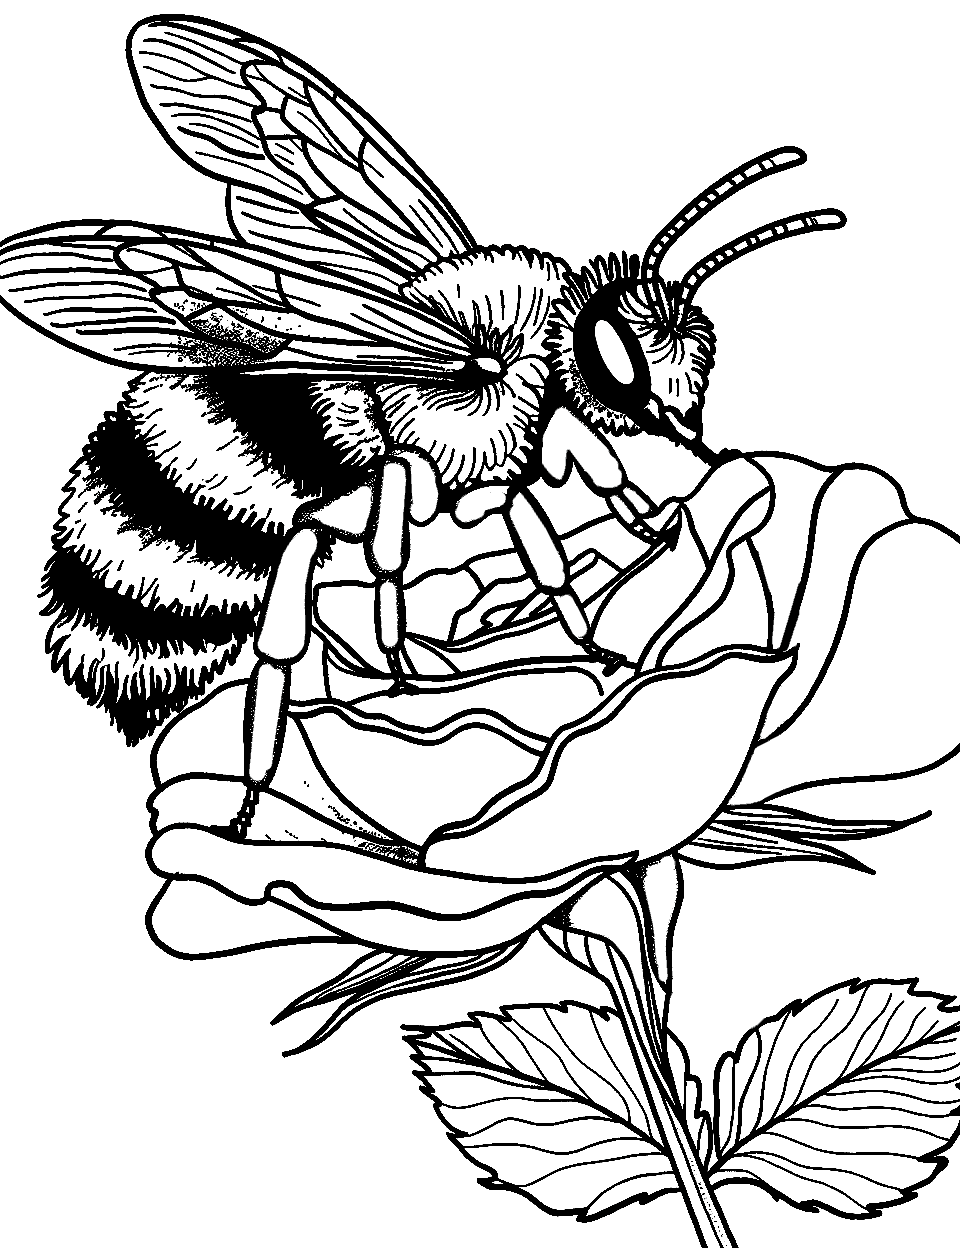 Garden Bee on a Rose Coloring Page - A detailed scene of a bee delicately landing on the petal of a rose.